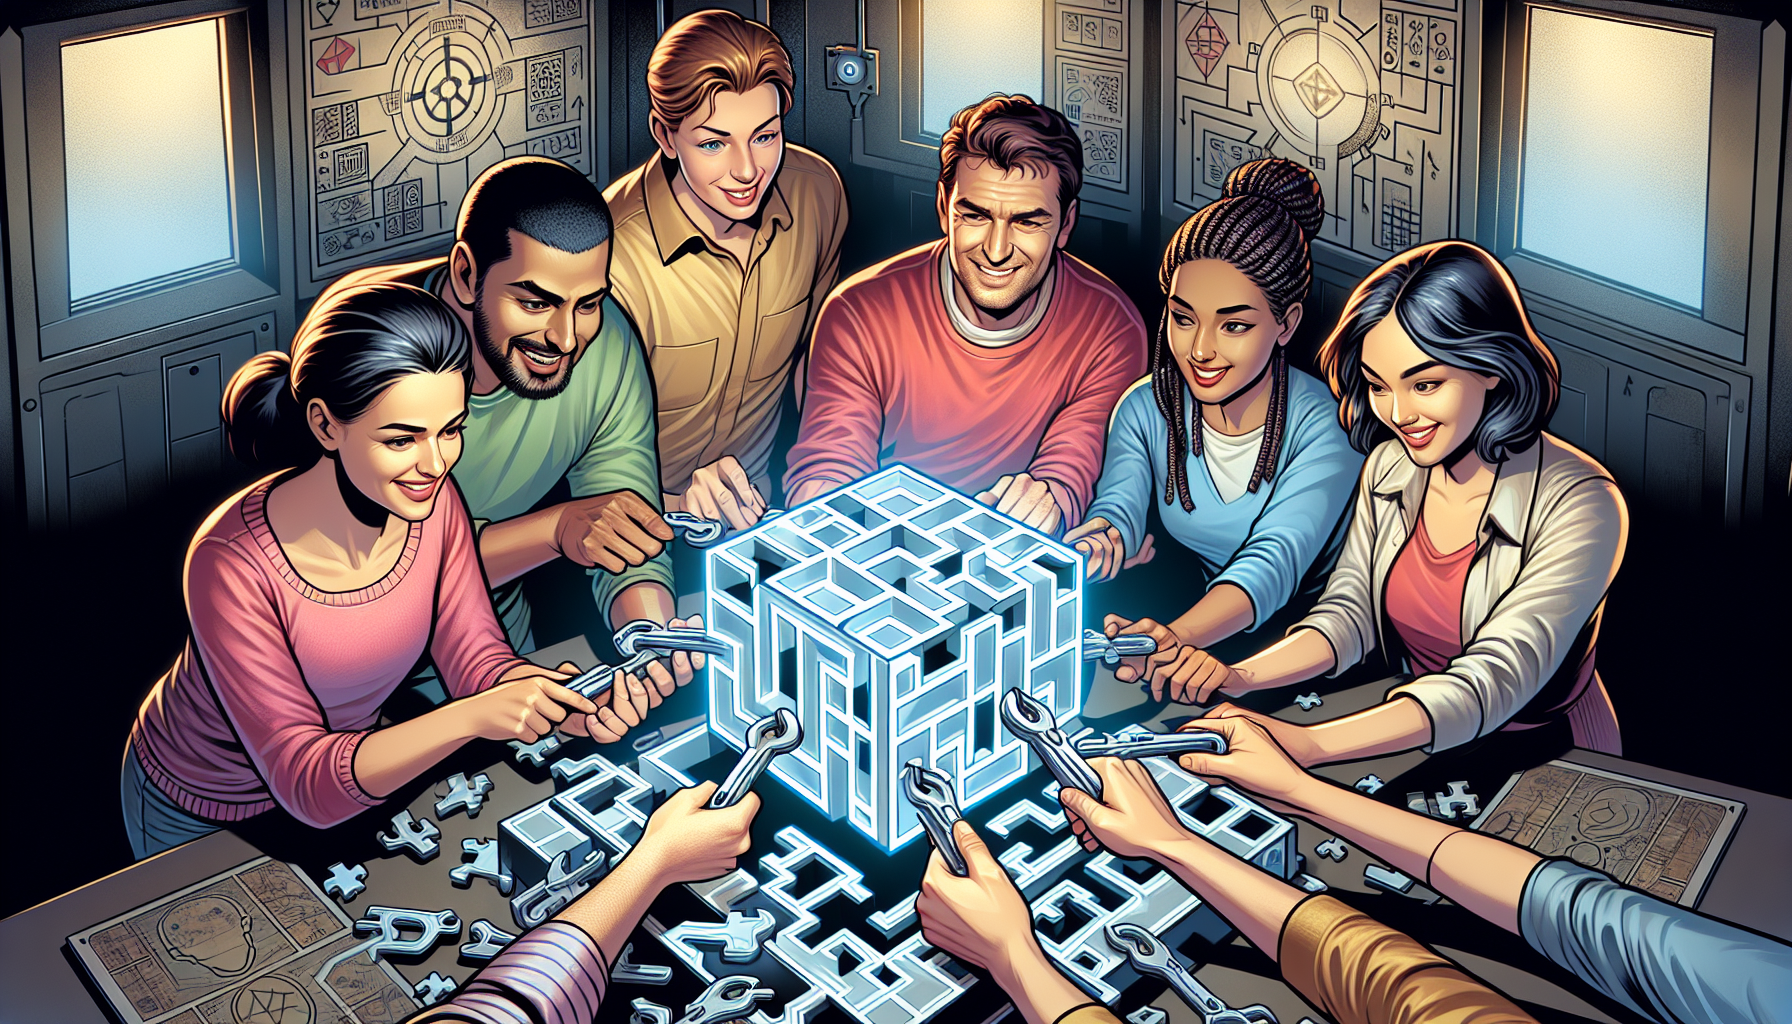 A group of diverse individuals collaborating on a complex puzzle